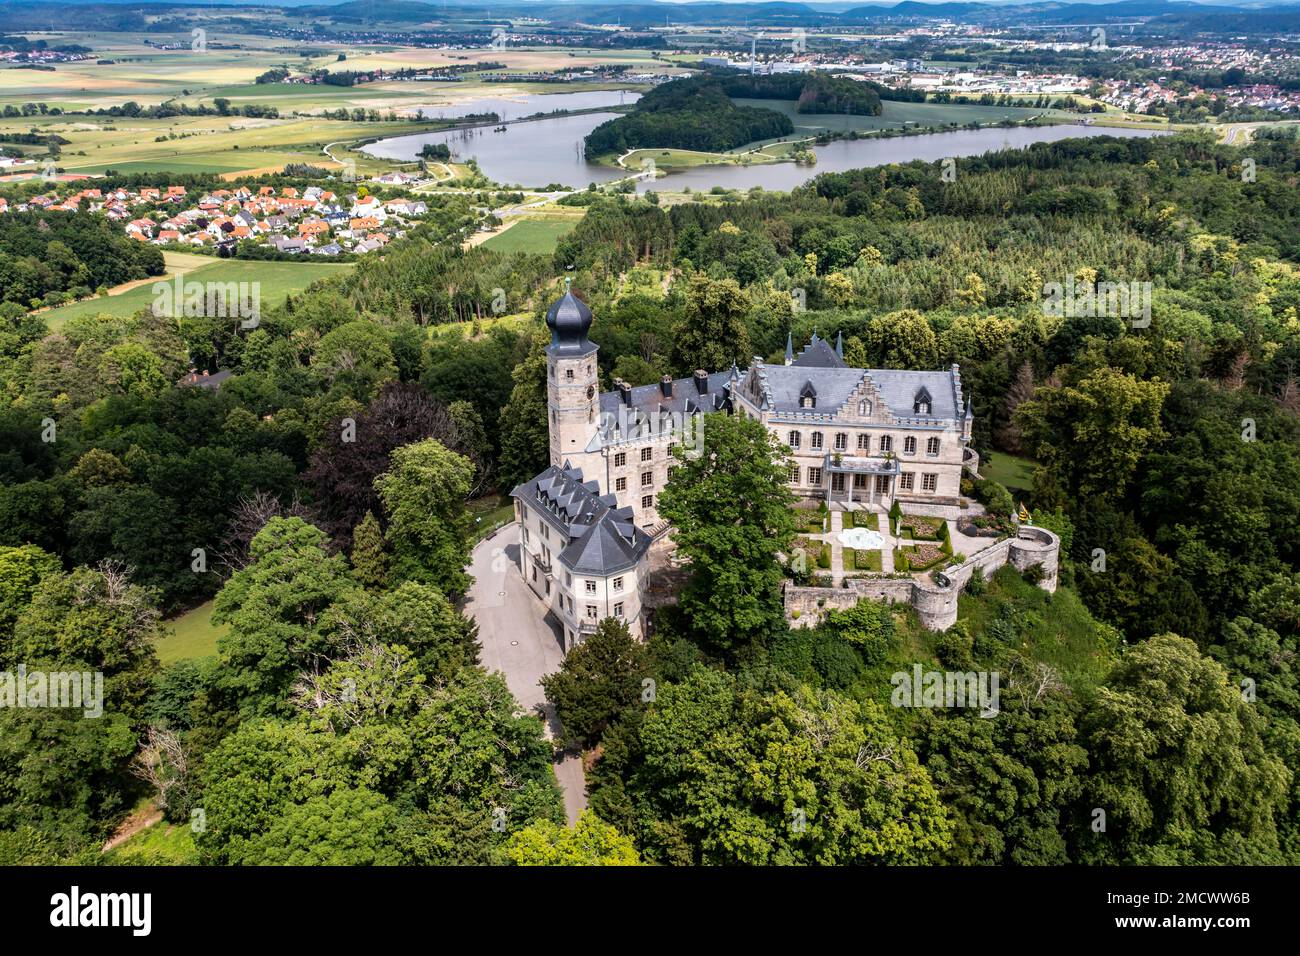 Aerial view, Callenberg Castle, hunting lodge and summer palace of the Dukes of Saxe-Coburg and Gotha, Coburg, Upper Franconia, Bavaria, Germany Stock Photo